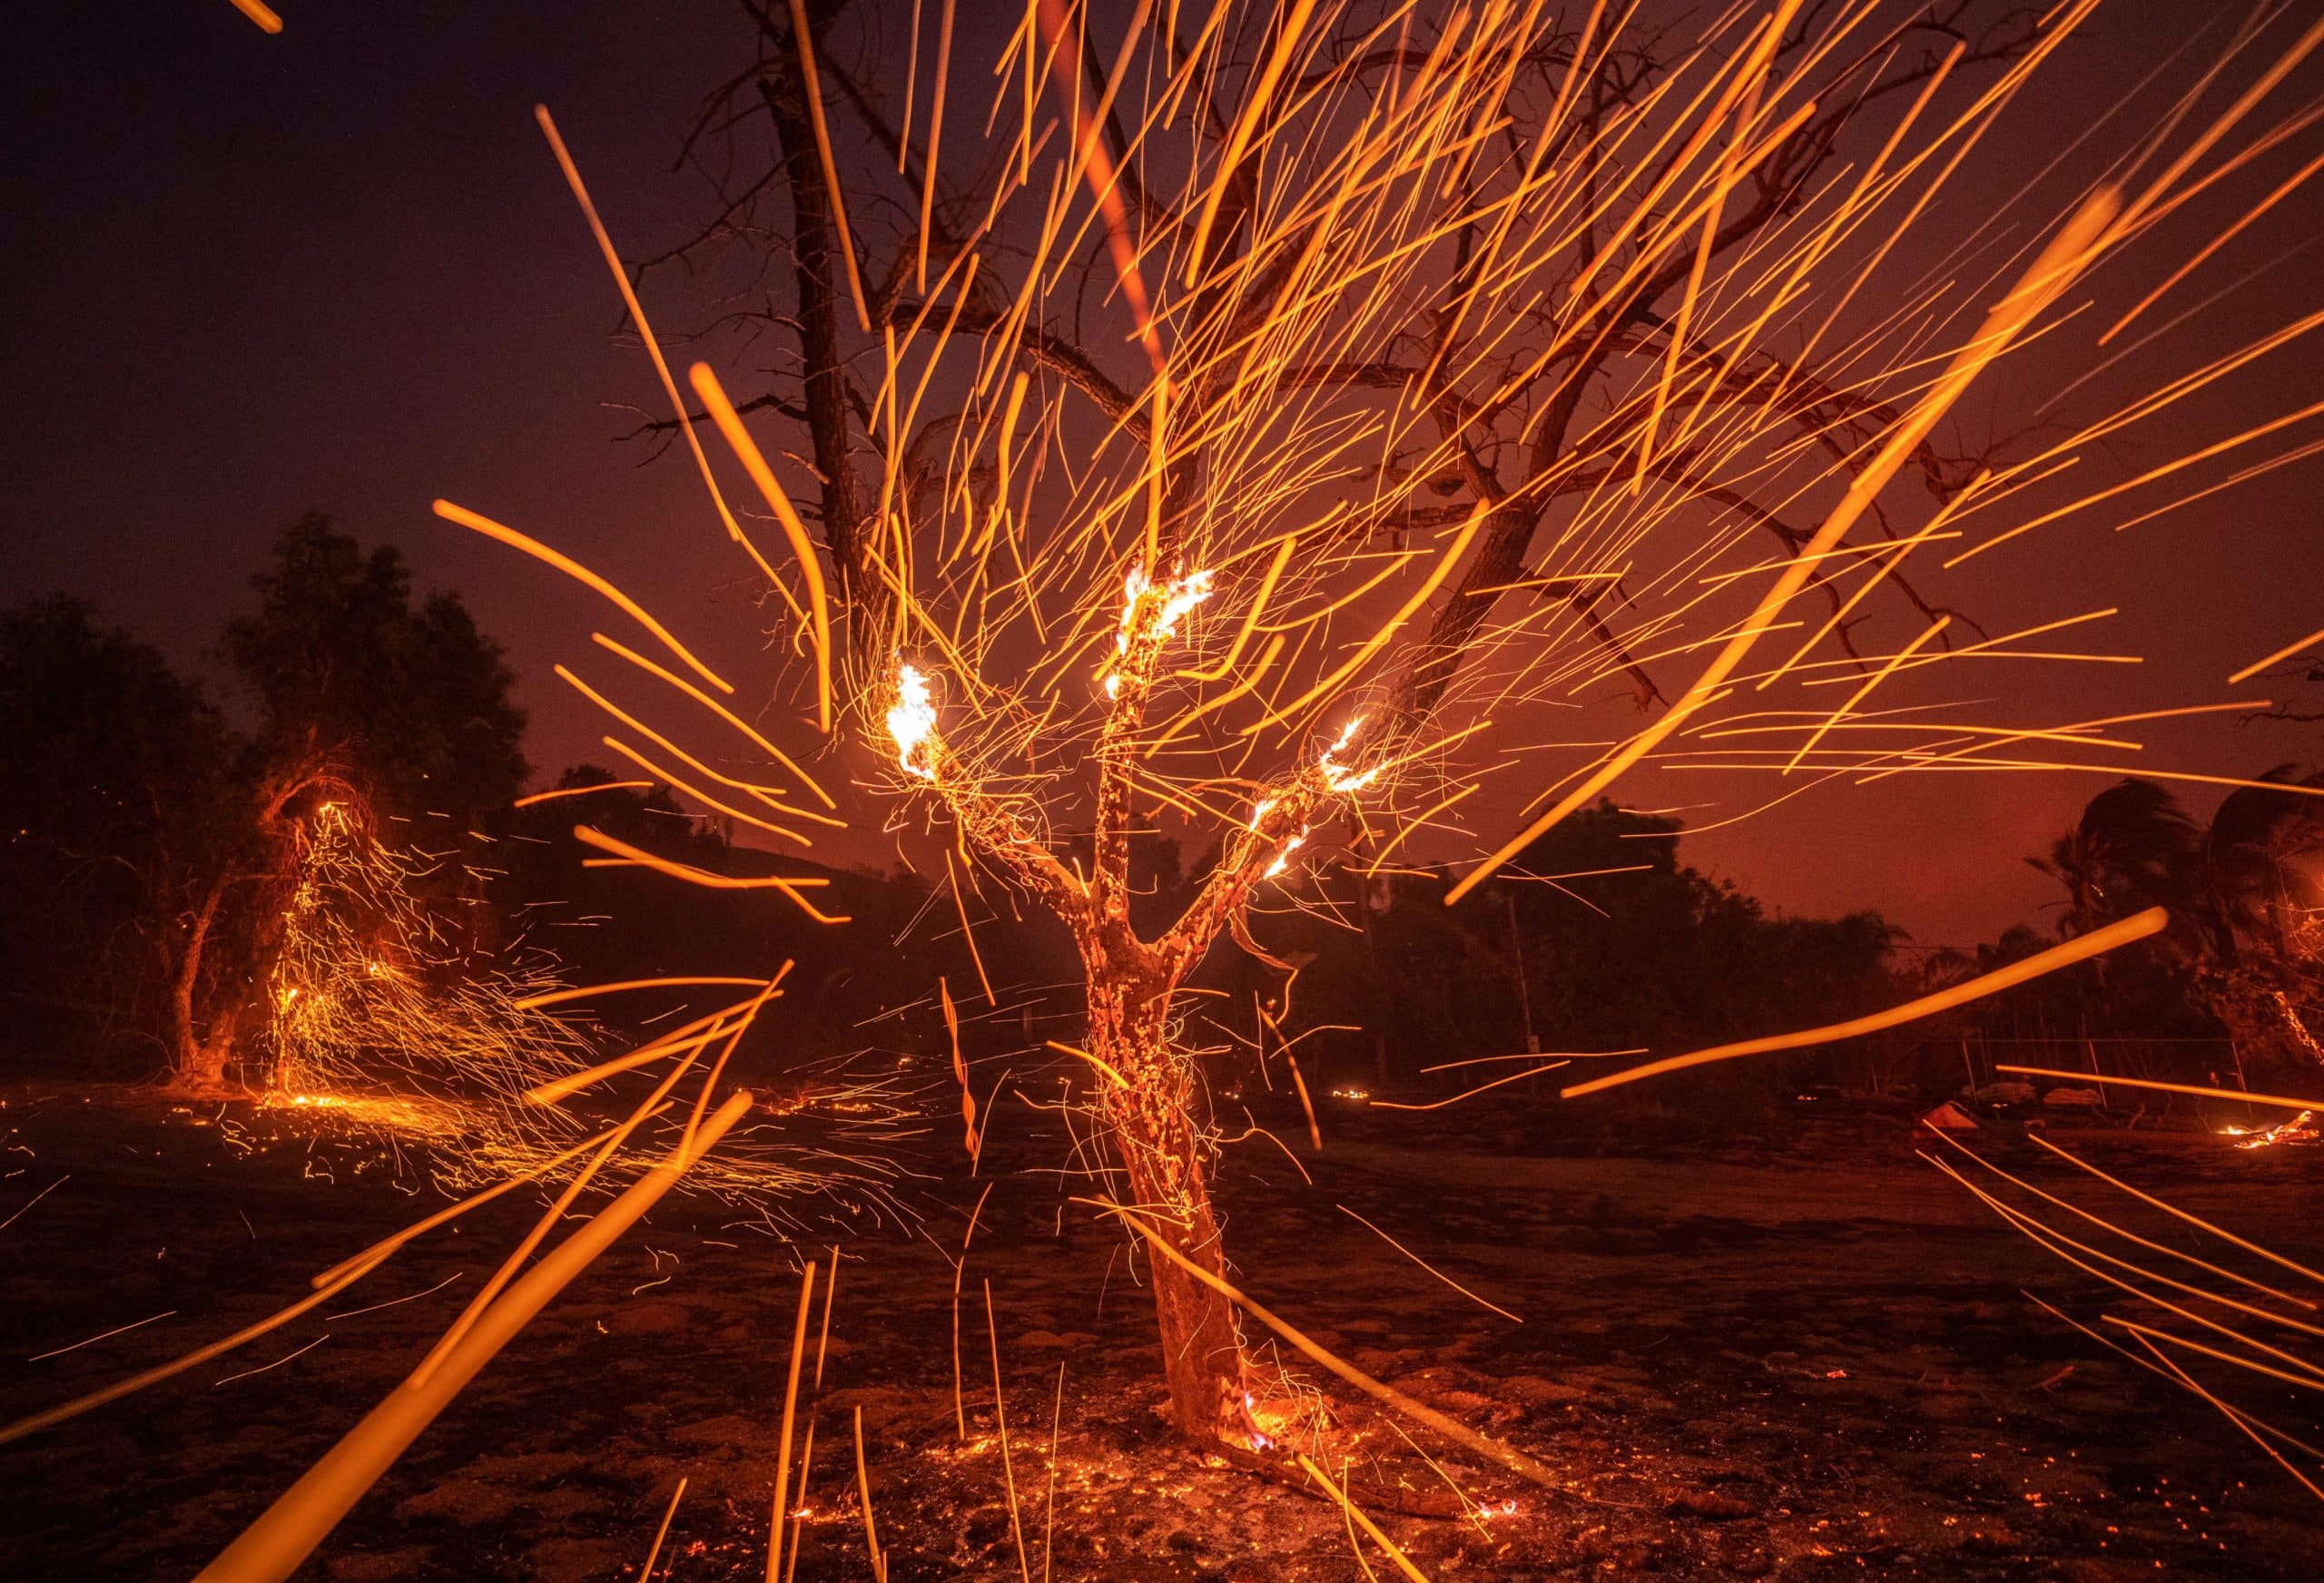 Stuart Palley Photo of a tree on fire with sparks flying